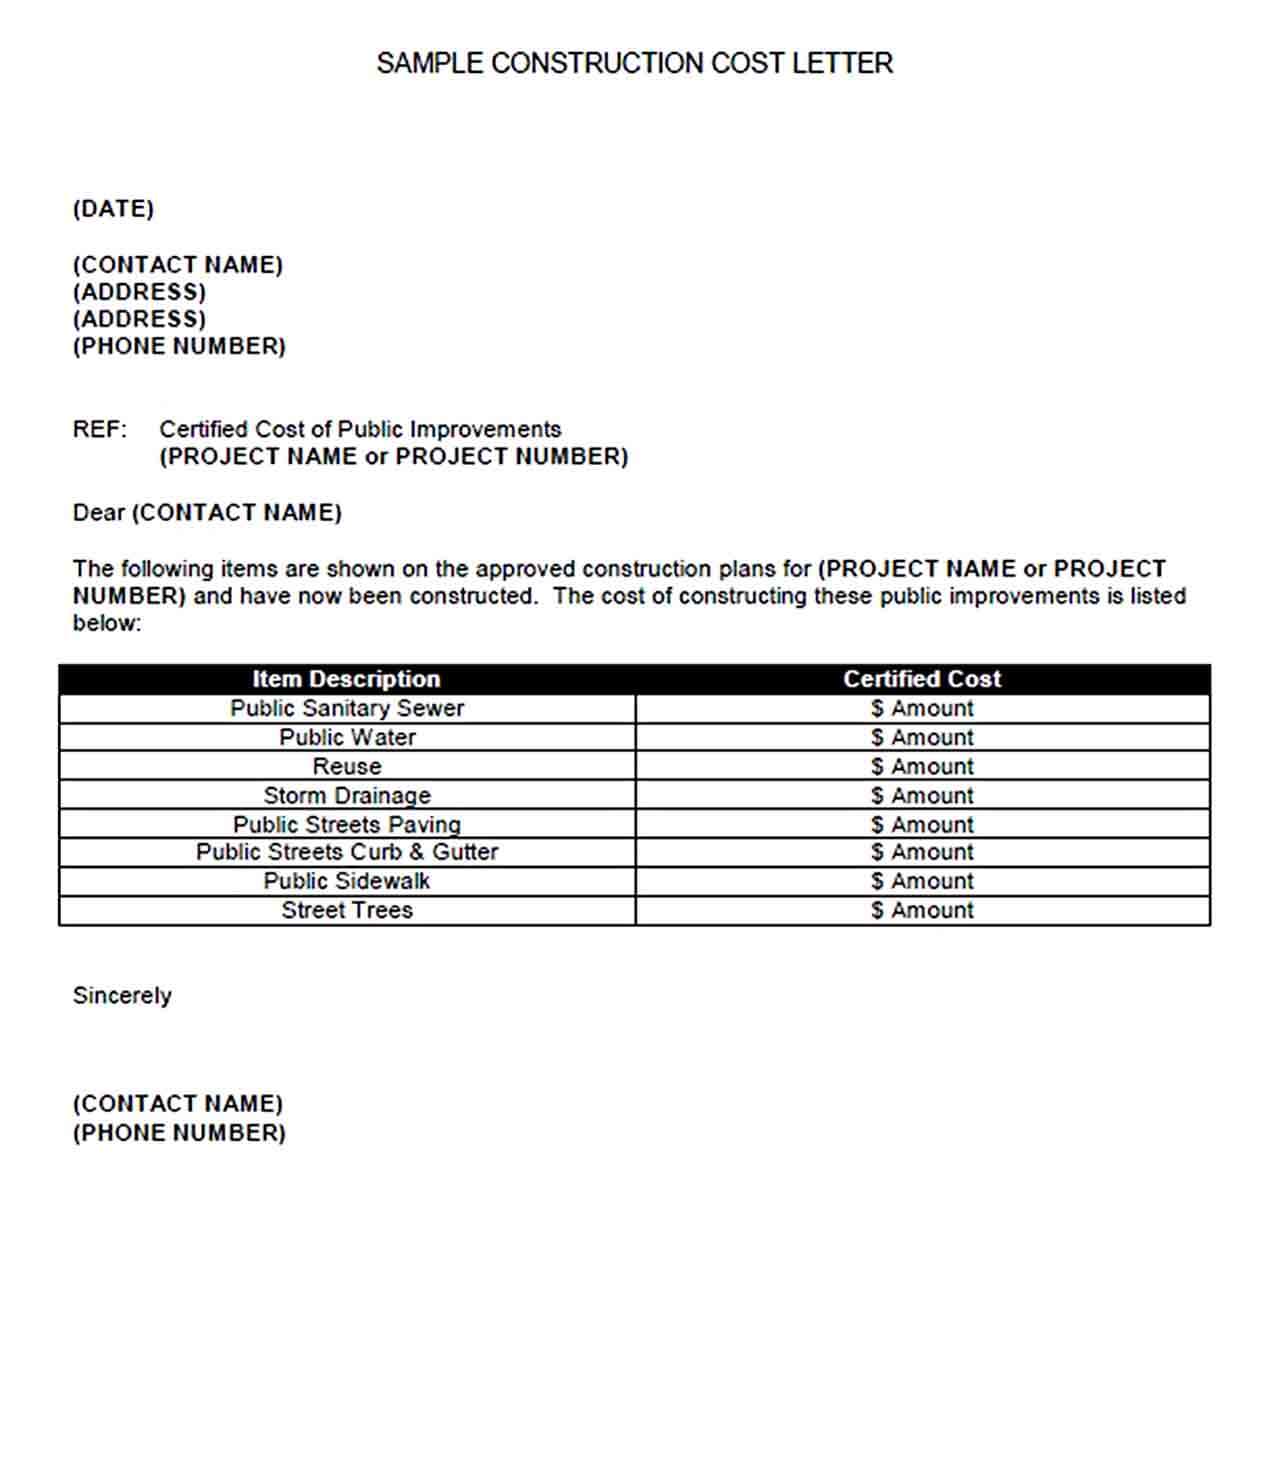 Sample Construction Cost Letter